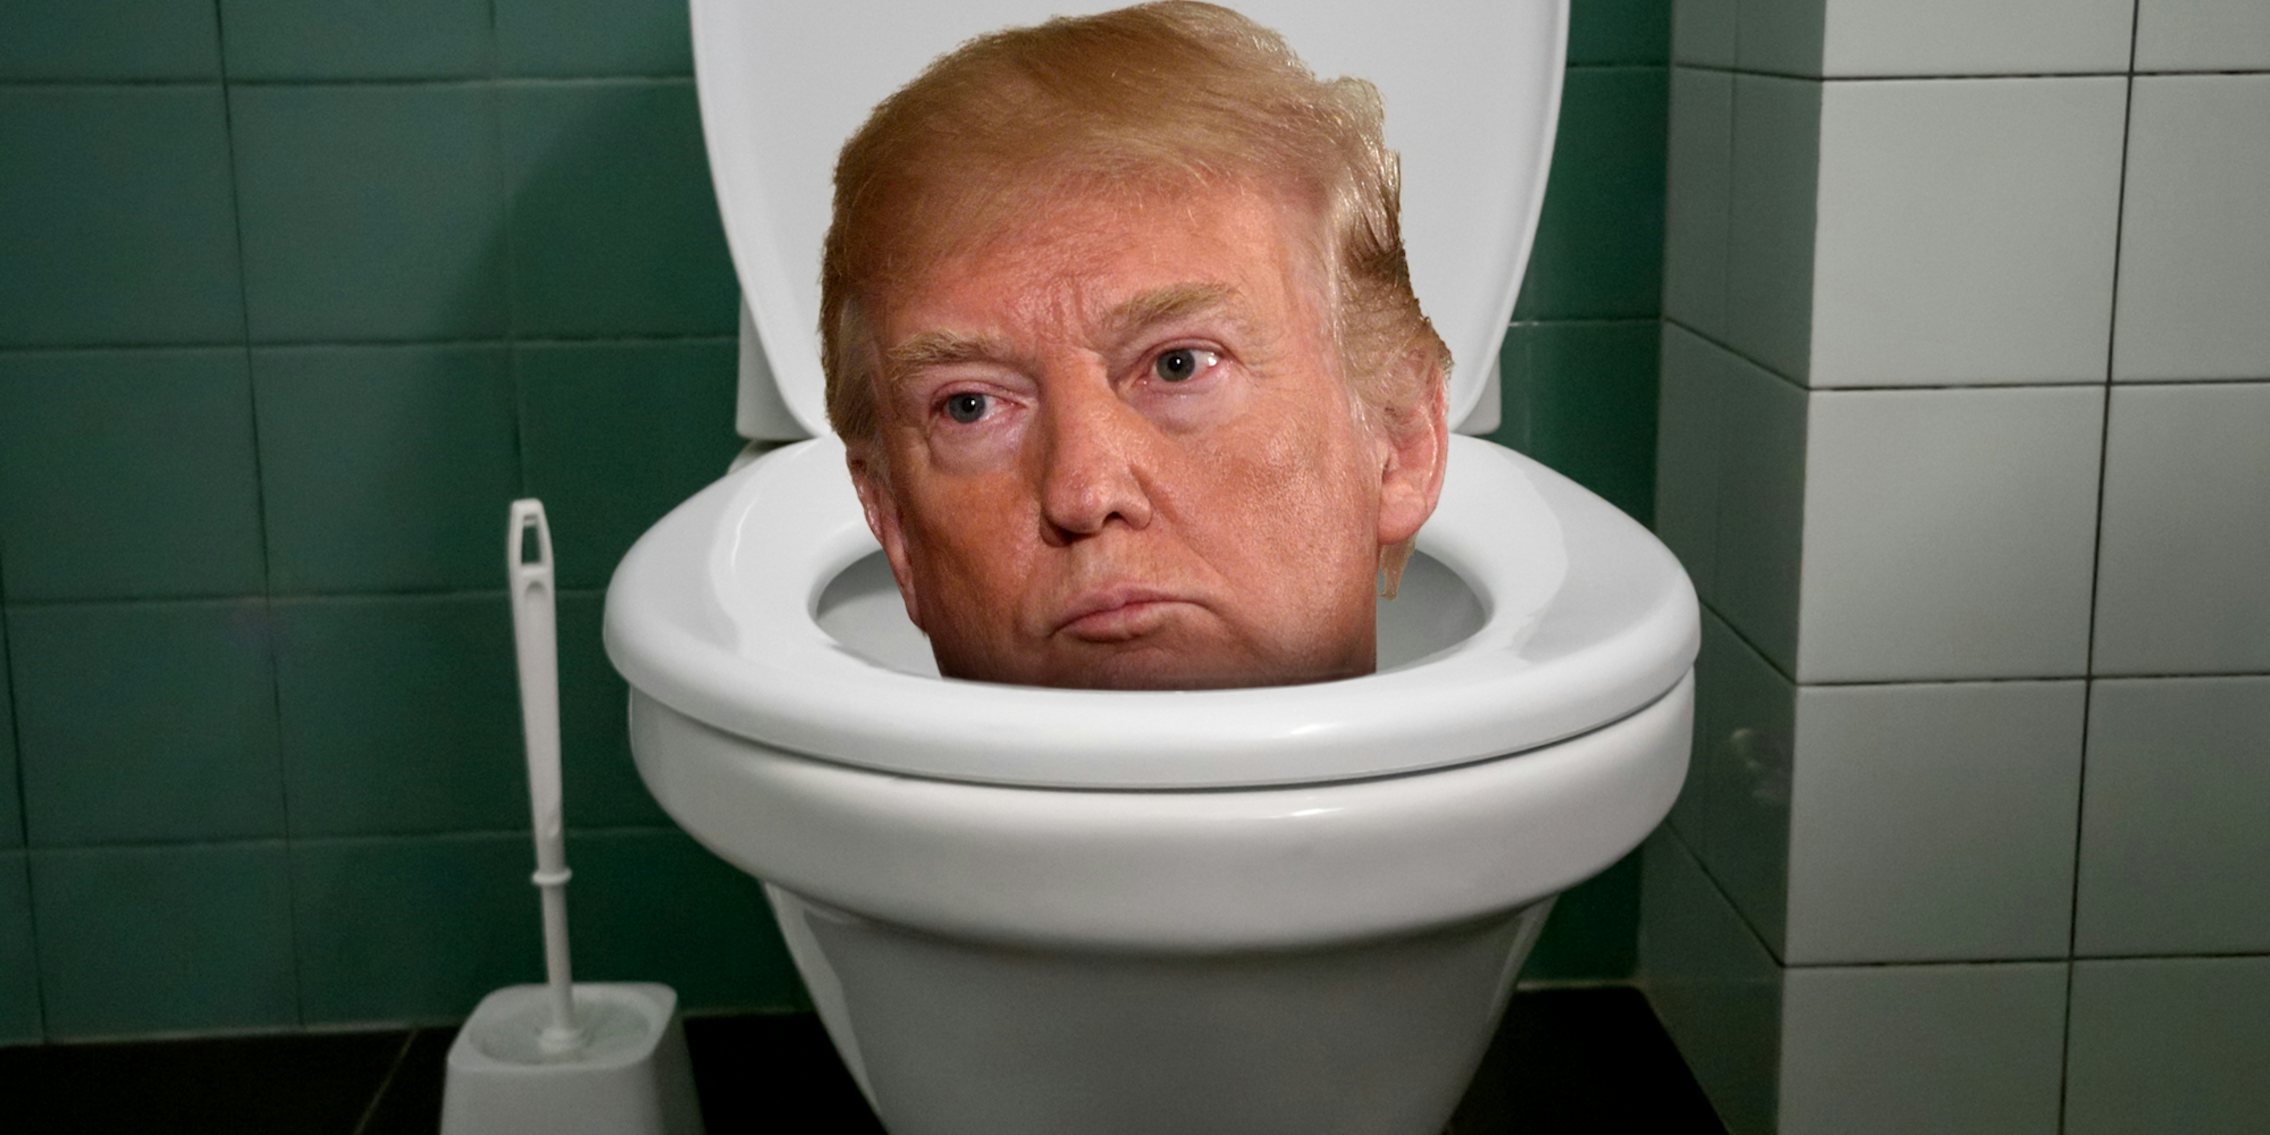 Trump poking his head out from a toilet